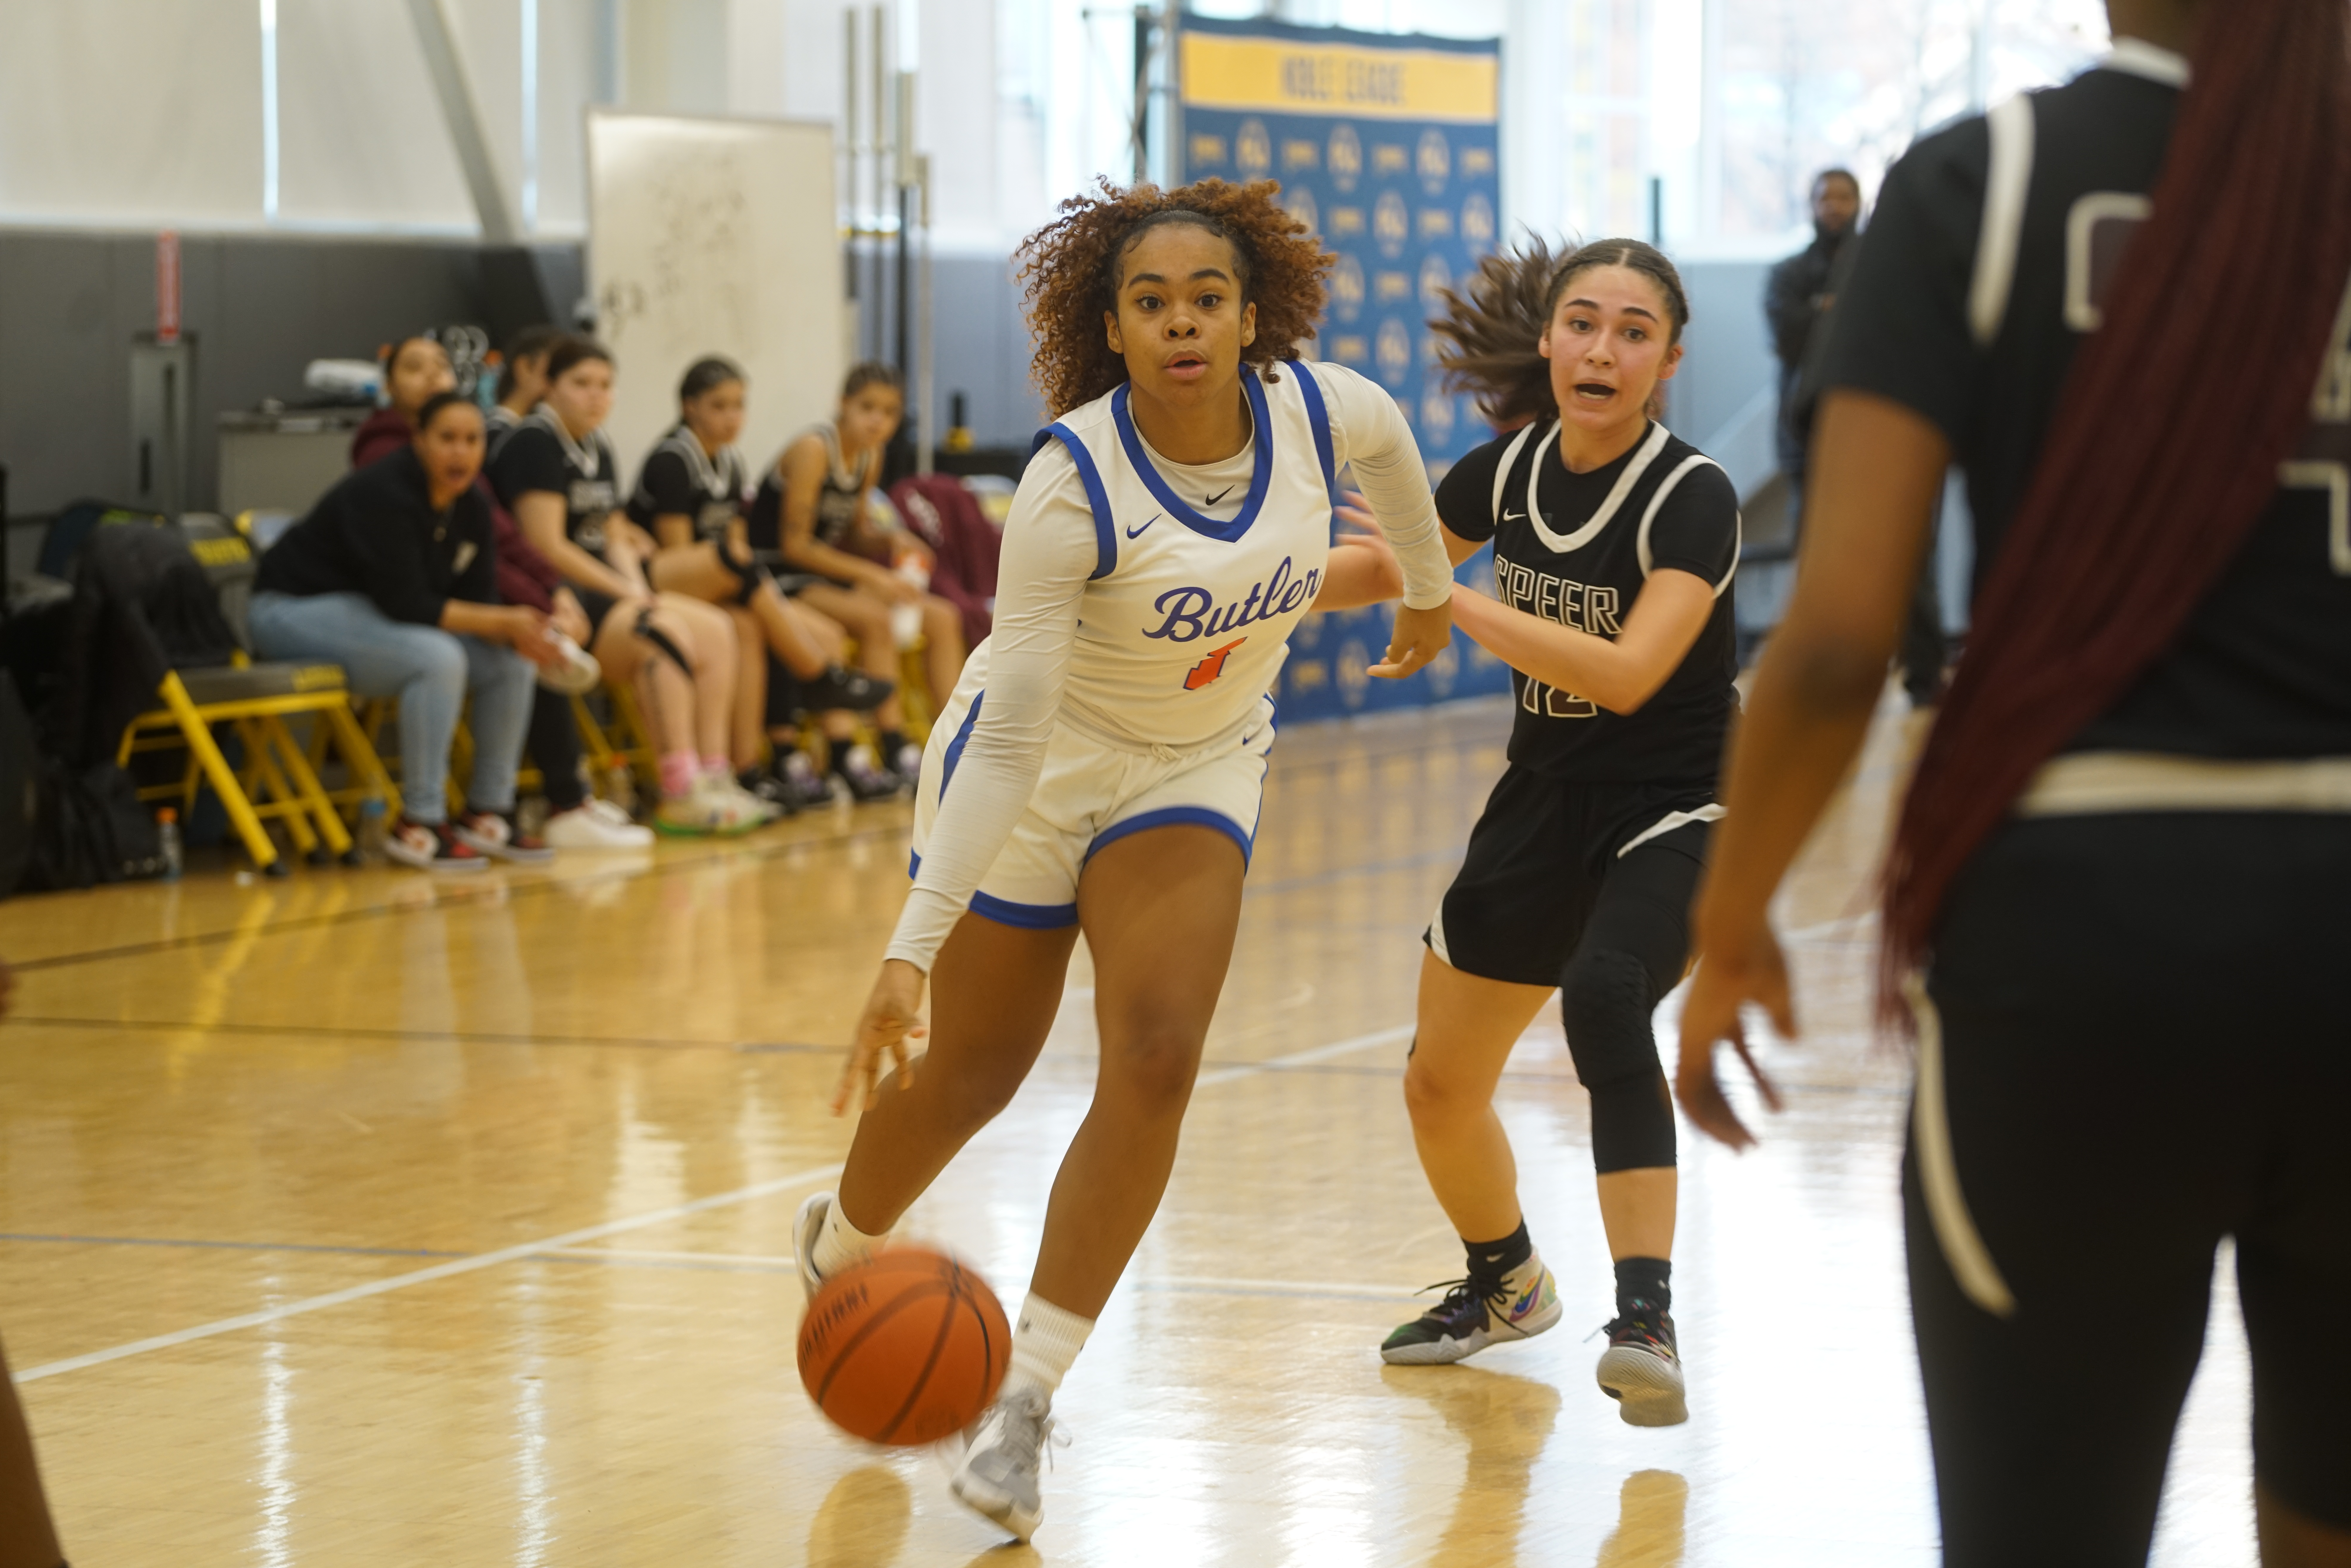 Xamiya playing in a game against a fellow Noble school team. She is in the center, dribbling the ball, as an opposing player closes in on her right.